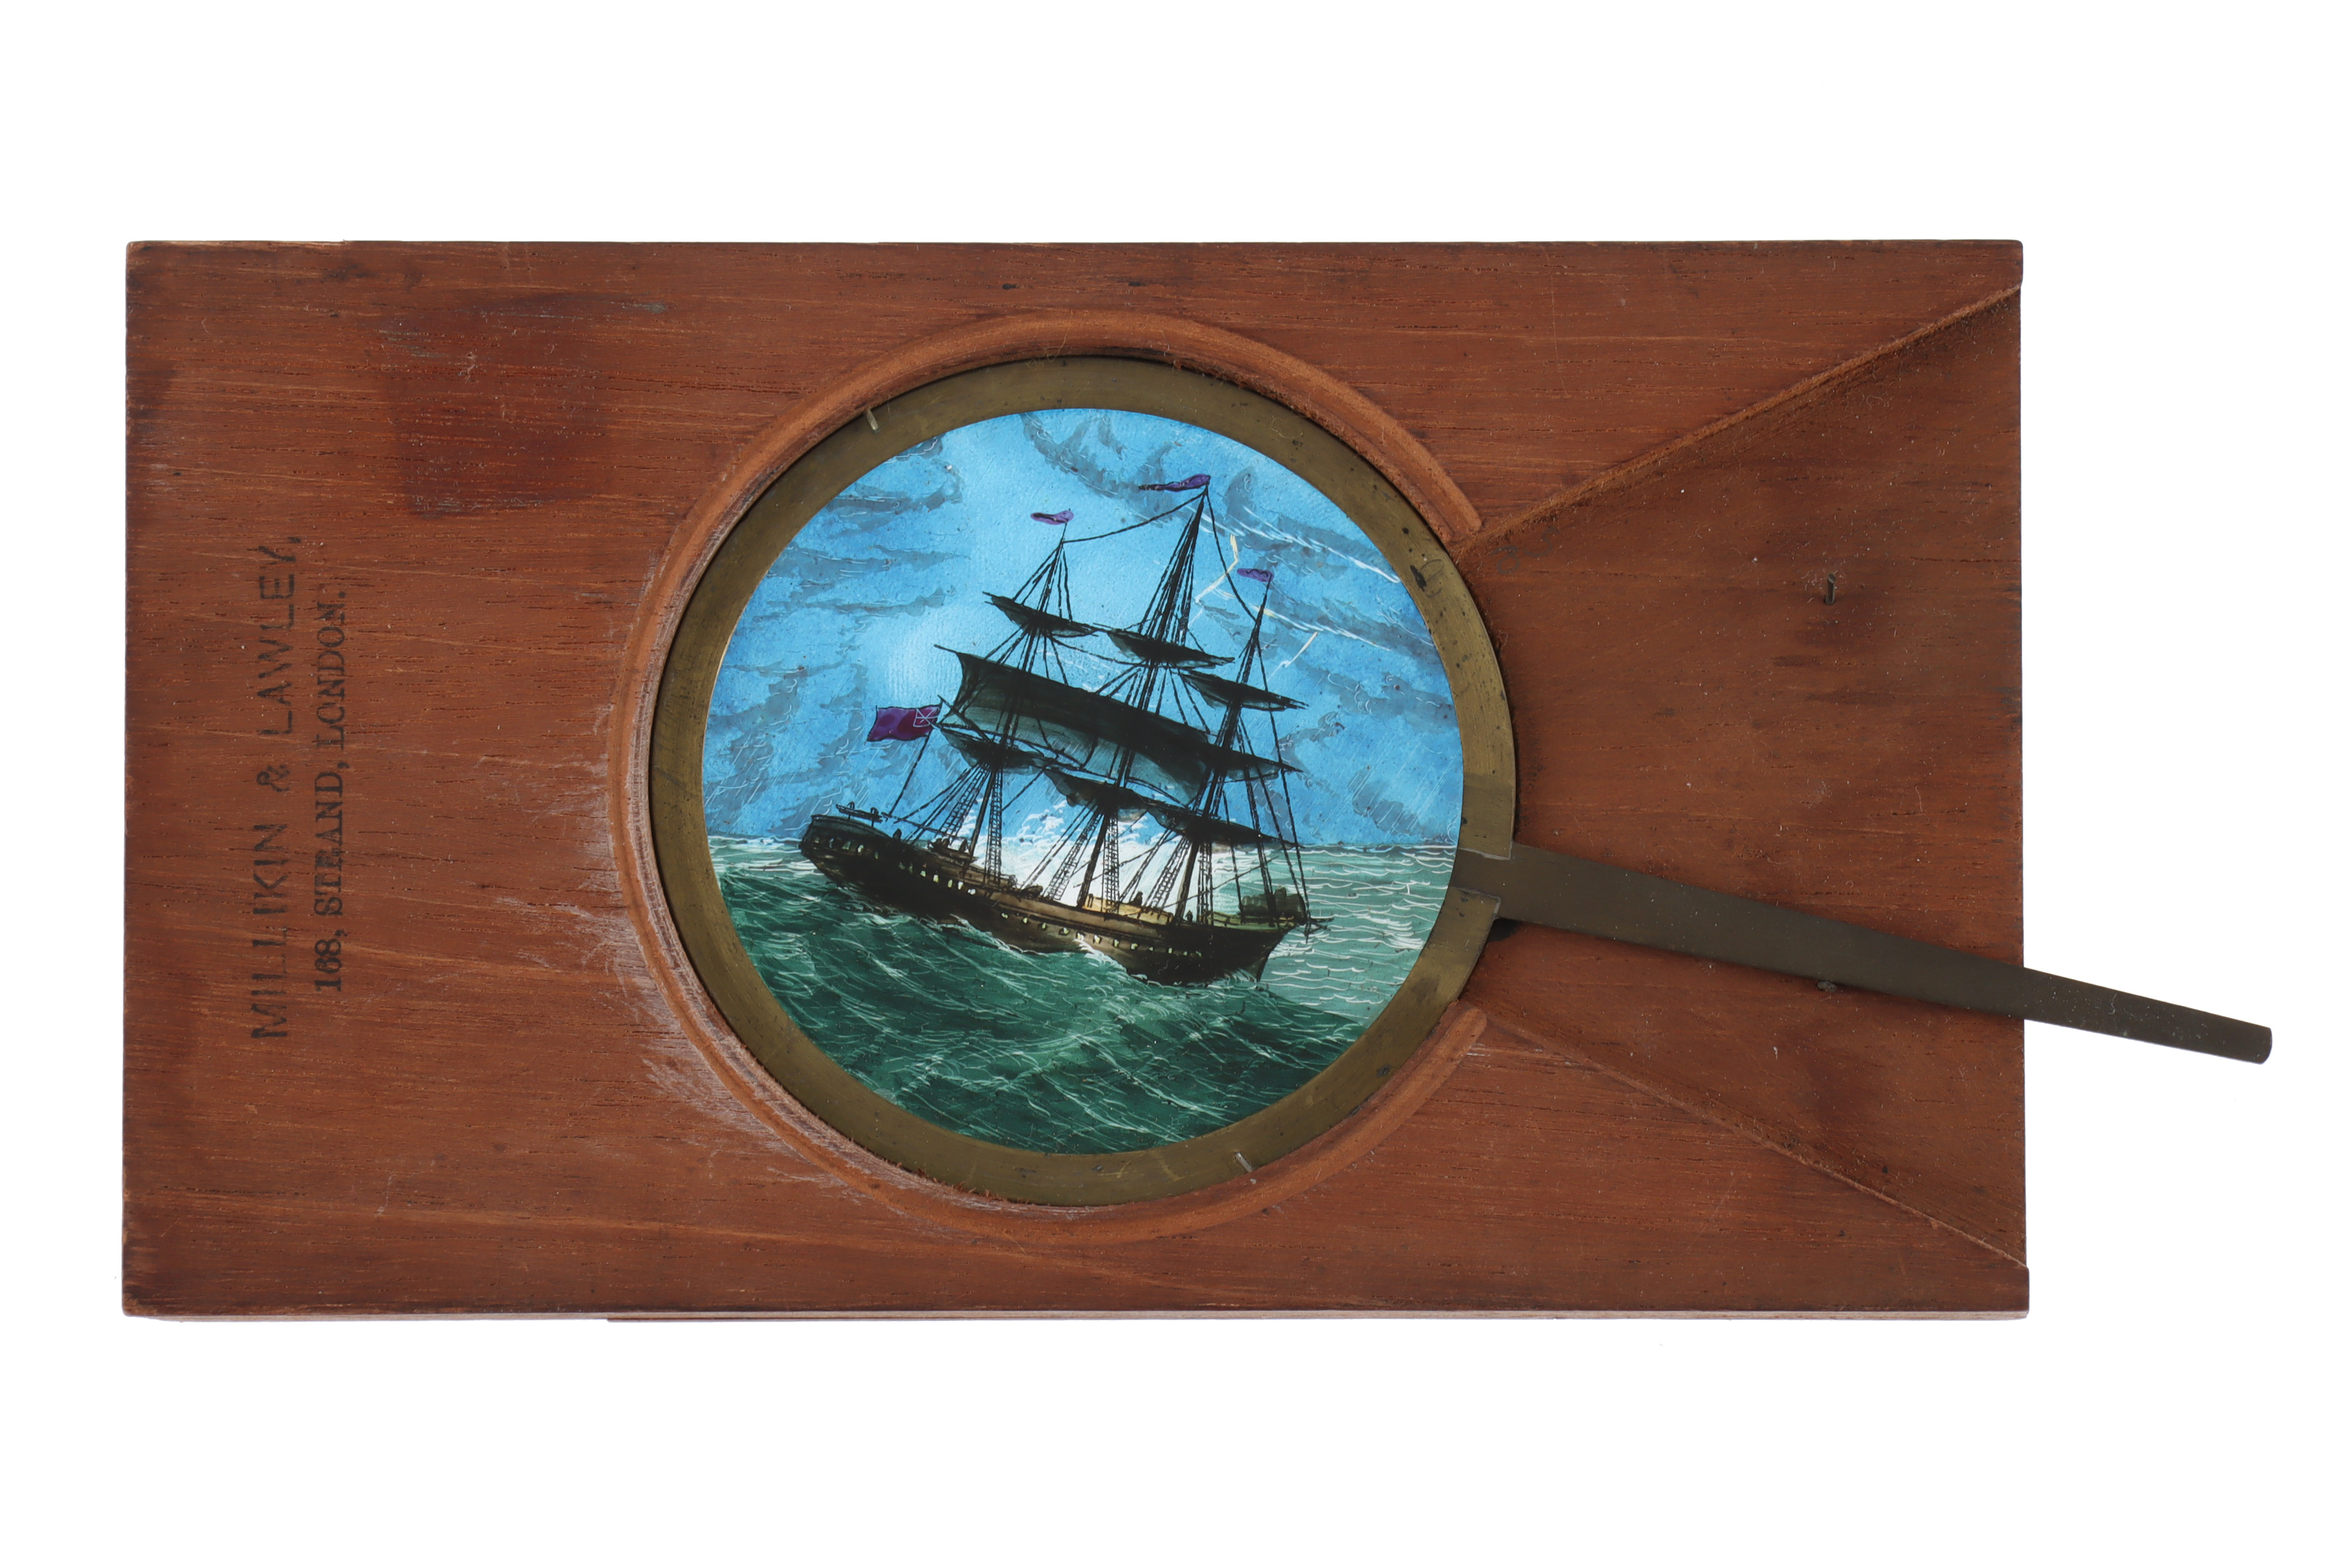 A ‘Ship in Storm’ Hand-Painted magic lantern lever slide, - Image 2 of 3